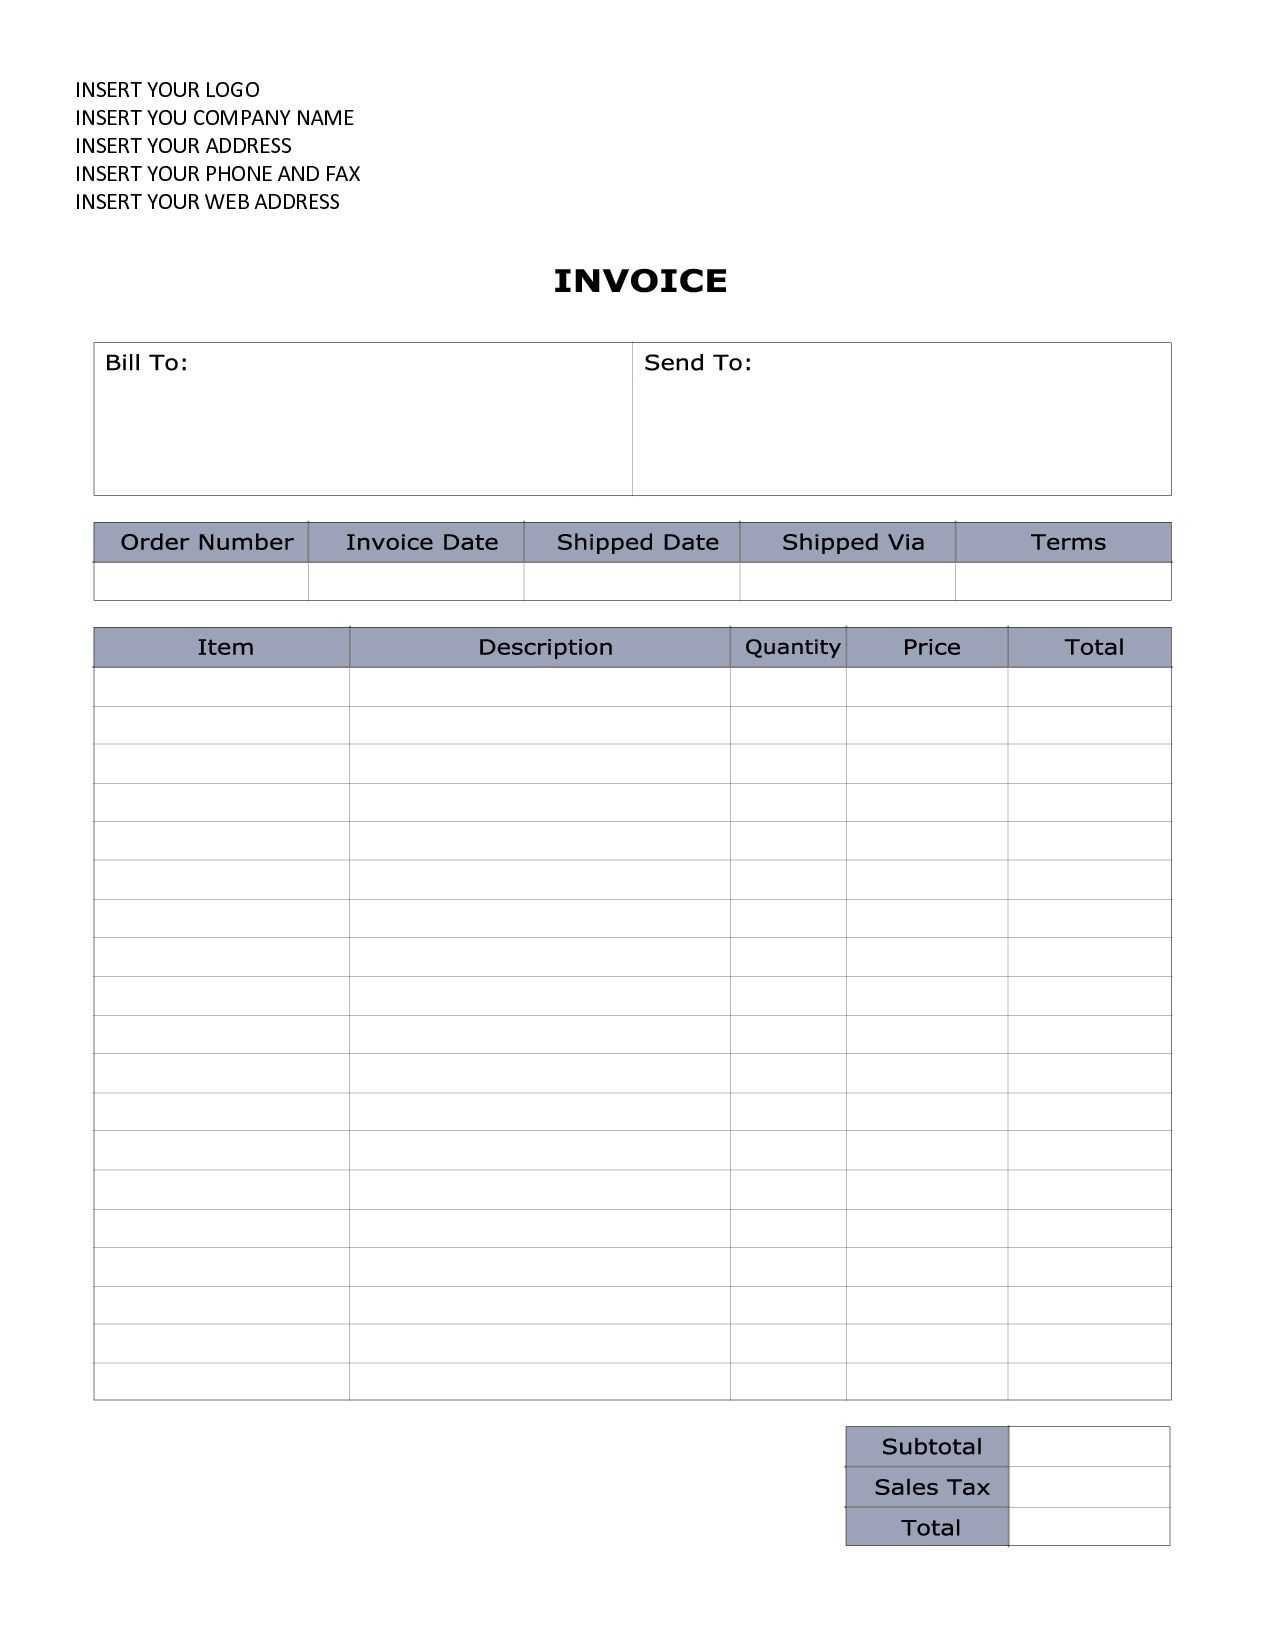 Service Order Invoice Template Sample Invoice For Bookkeeping Throughout Bookkeeping Invoice Template